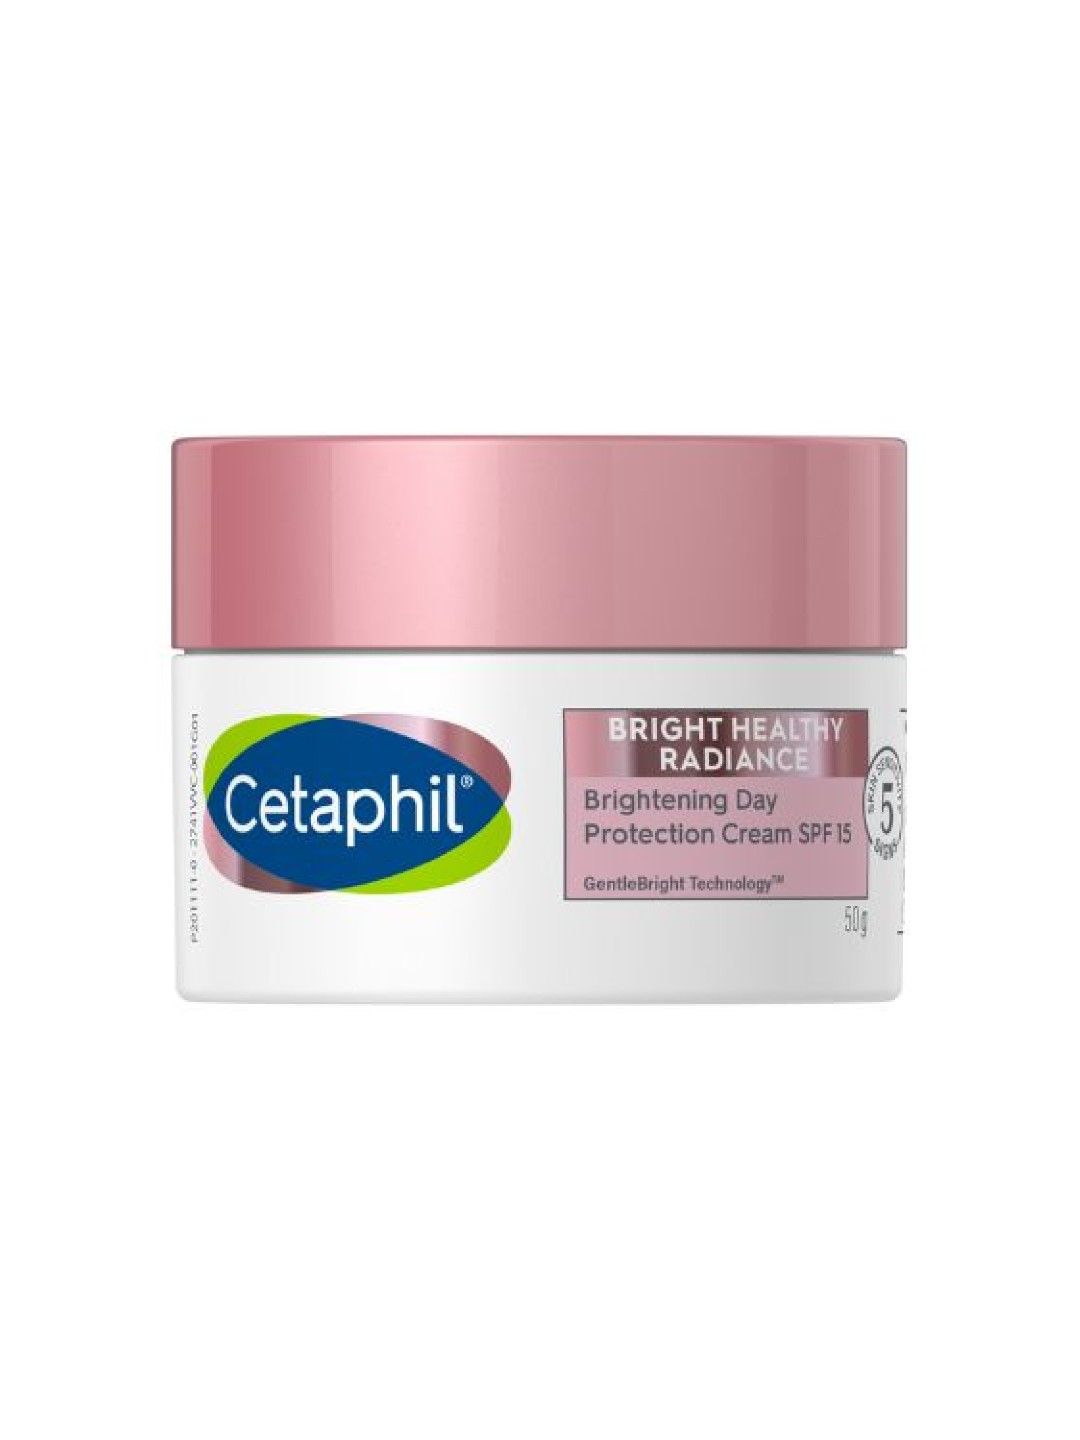 Cetaphil Brightening Day Protection Cream SPF15 (50g) (No Color- Image 1)